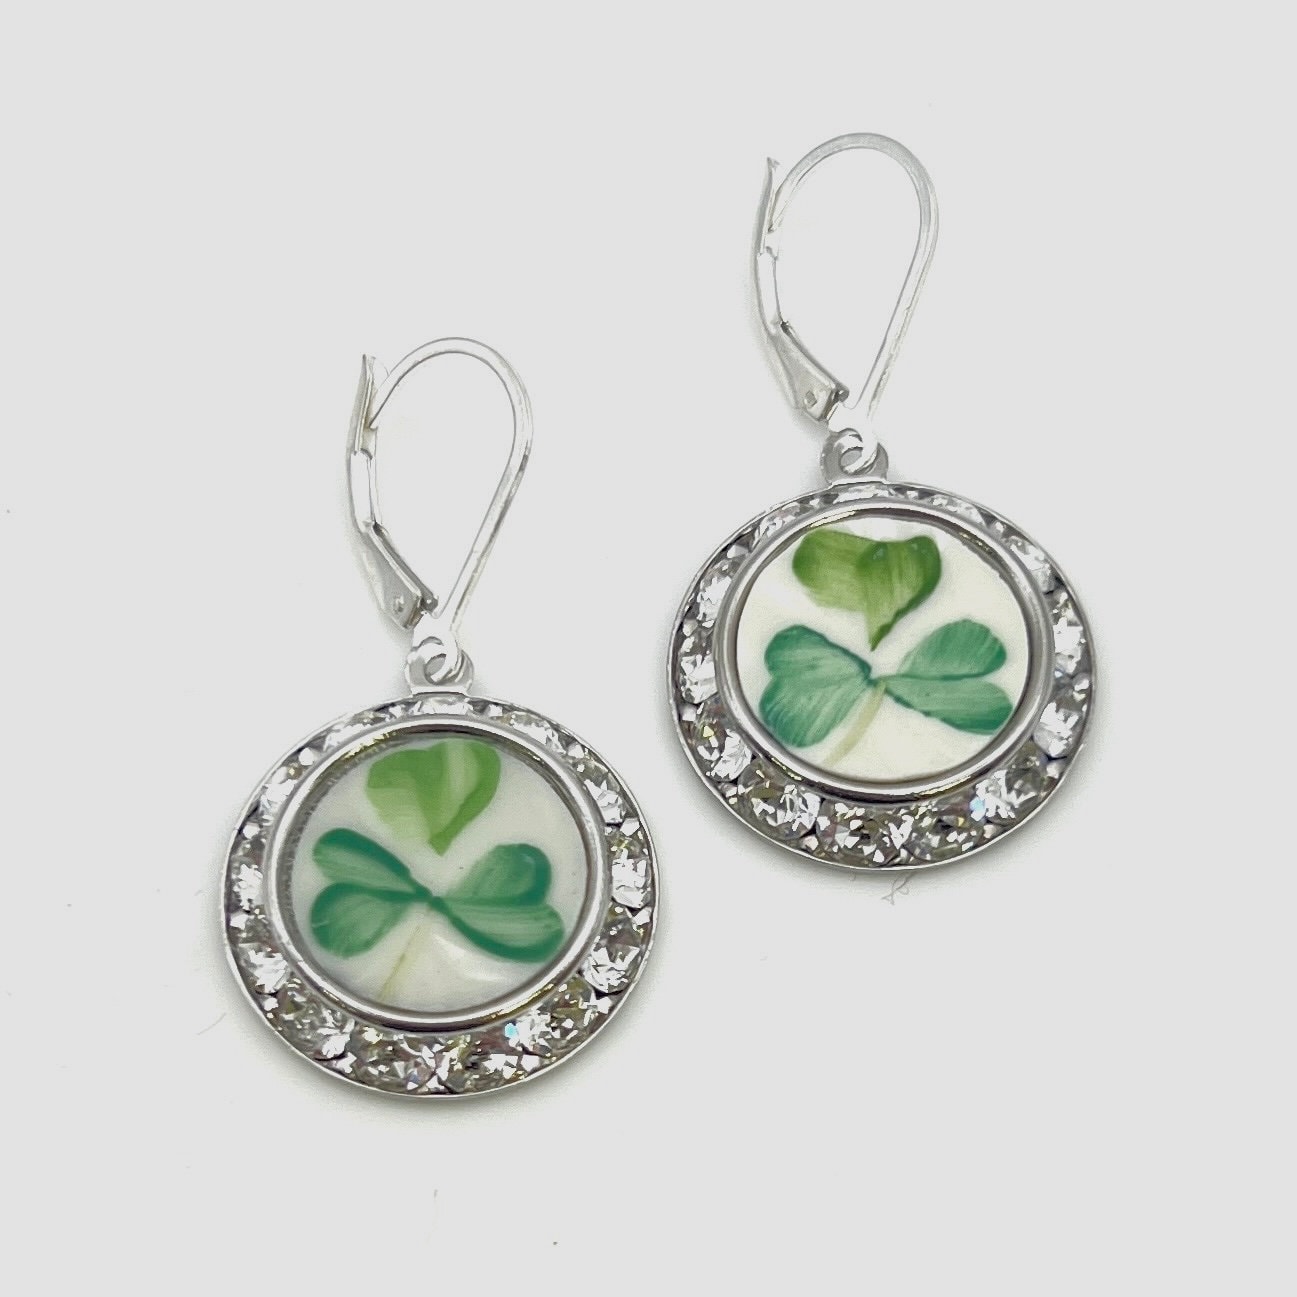 Belleek Irish China Crystal Earrings, Celtic Jewelry, Crystal Dangle Earrings, Belleek Broken China Jewelry, 20th Anniversary Gift for Wife